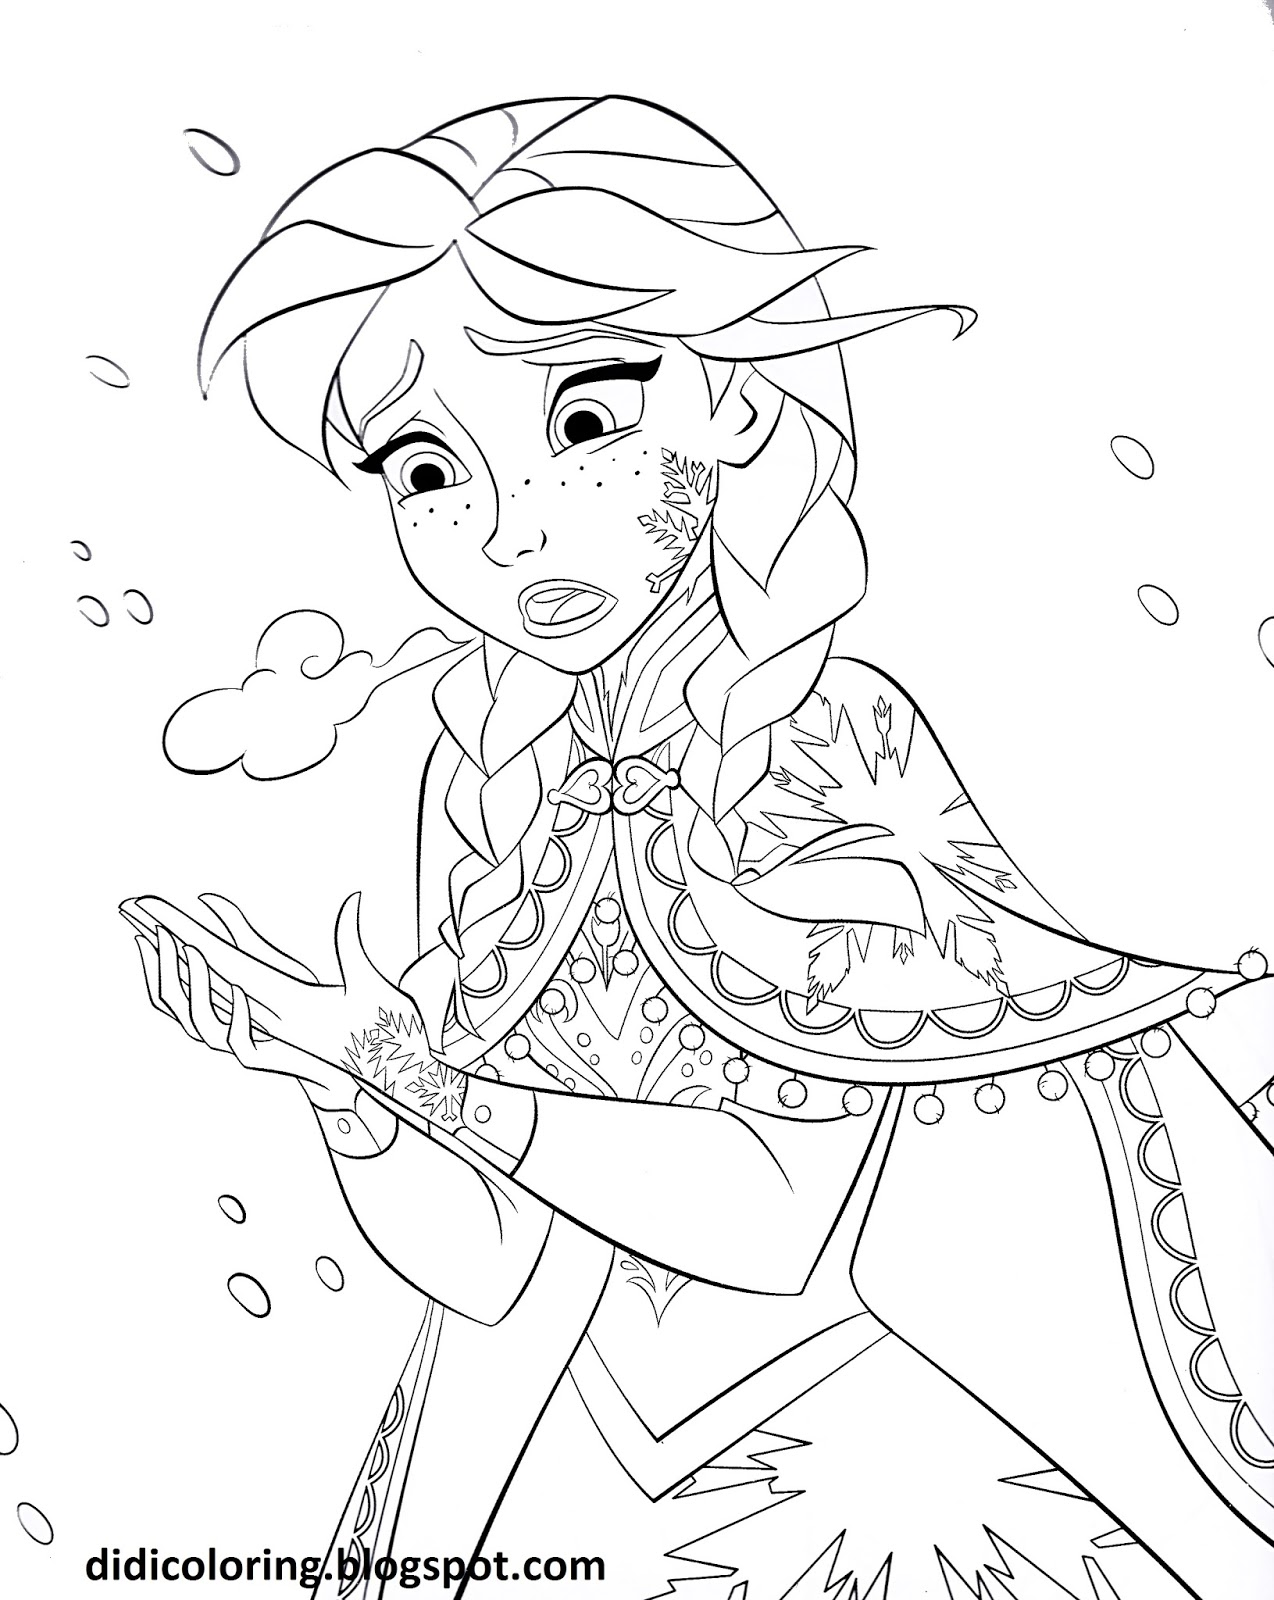 Download Princess Anna Walt Disney characters frozen movie coloring page Free printable Walt Disney characters frozen coloring for kids